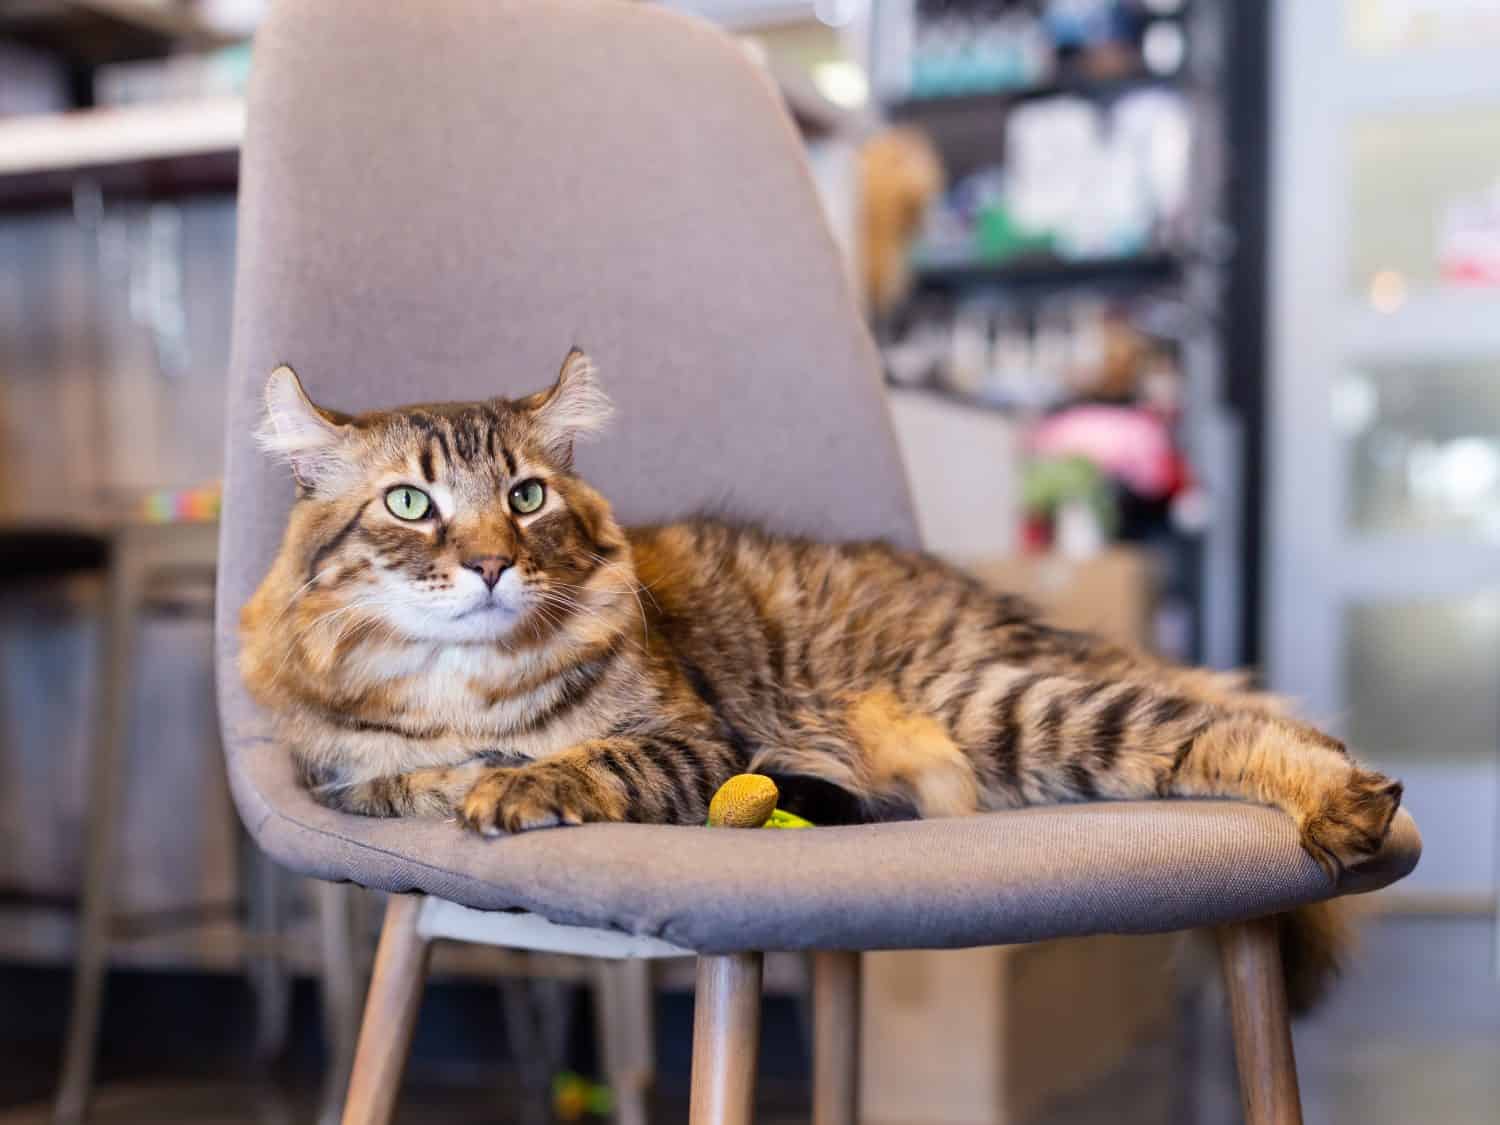 Selective focus view of serious looking Highlander cat lying down on chair indoors